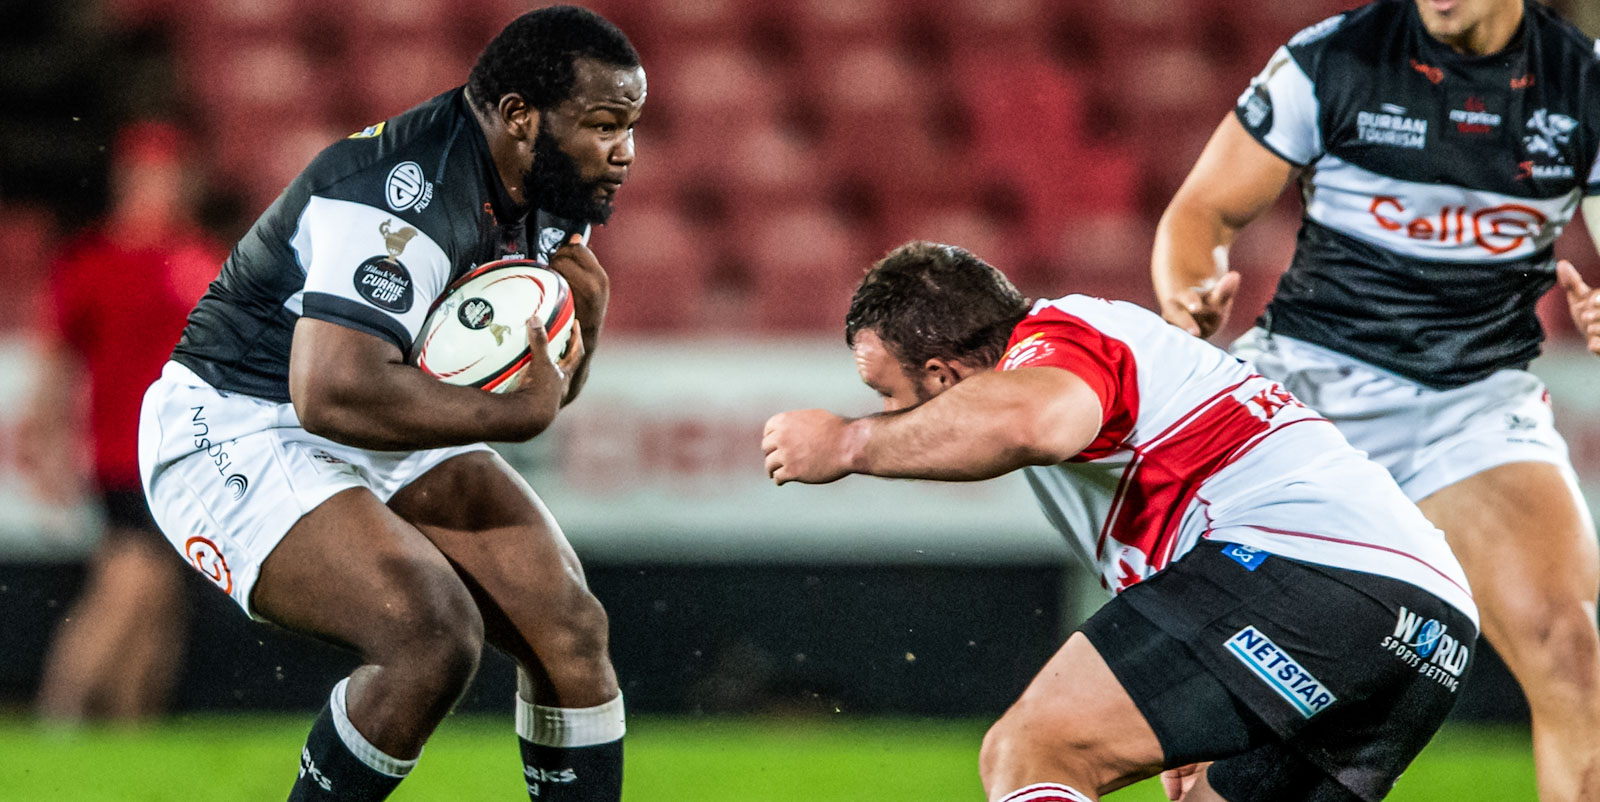 Ox Nche on the charge for the Cell C Sharks